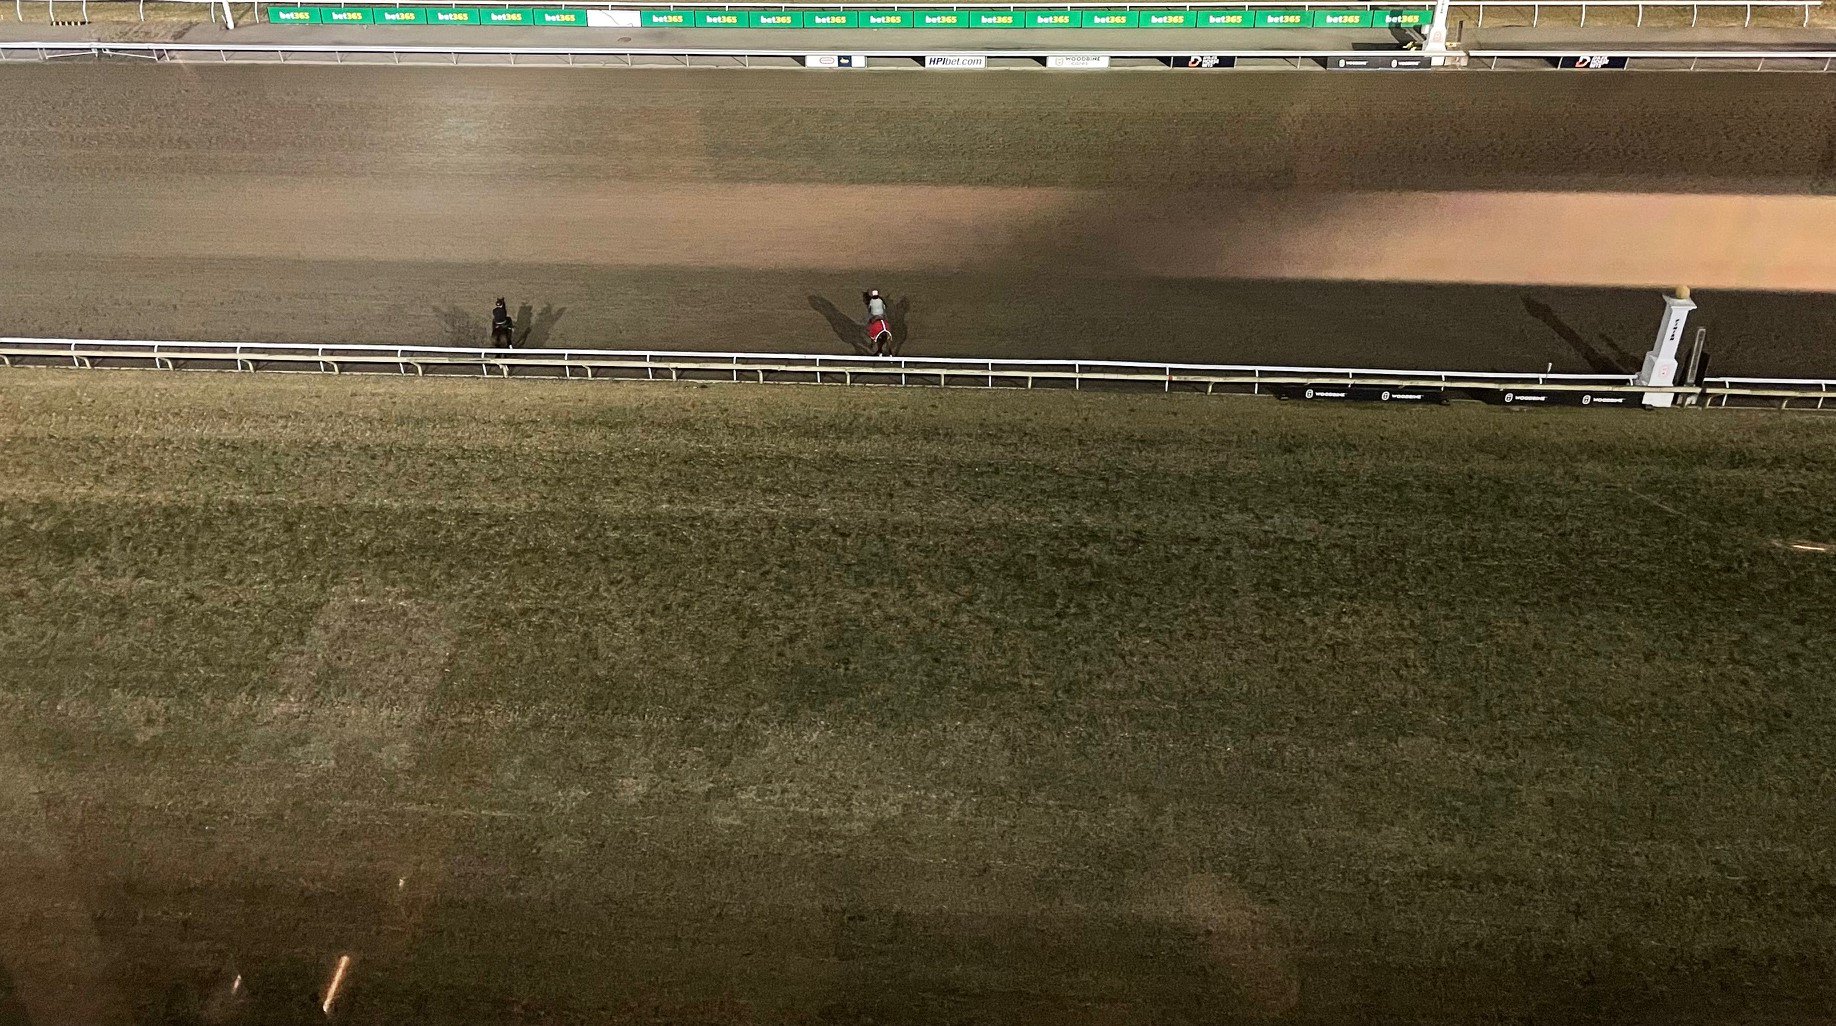 Daniel Bast's view of track from Woodbine's 6th floor 